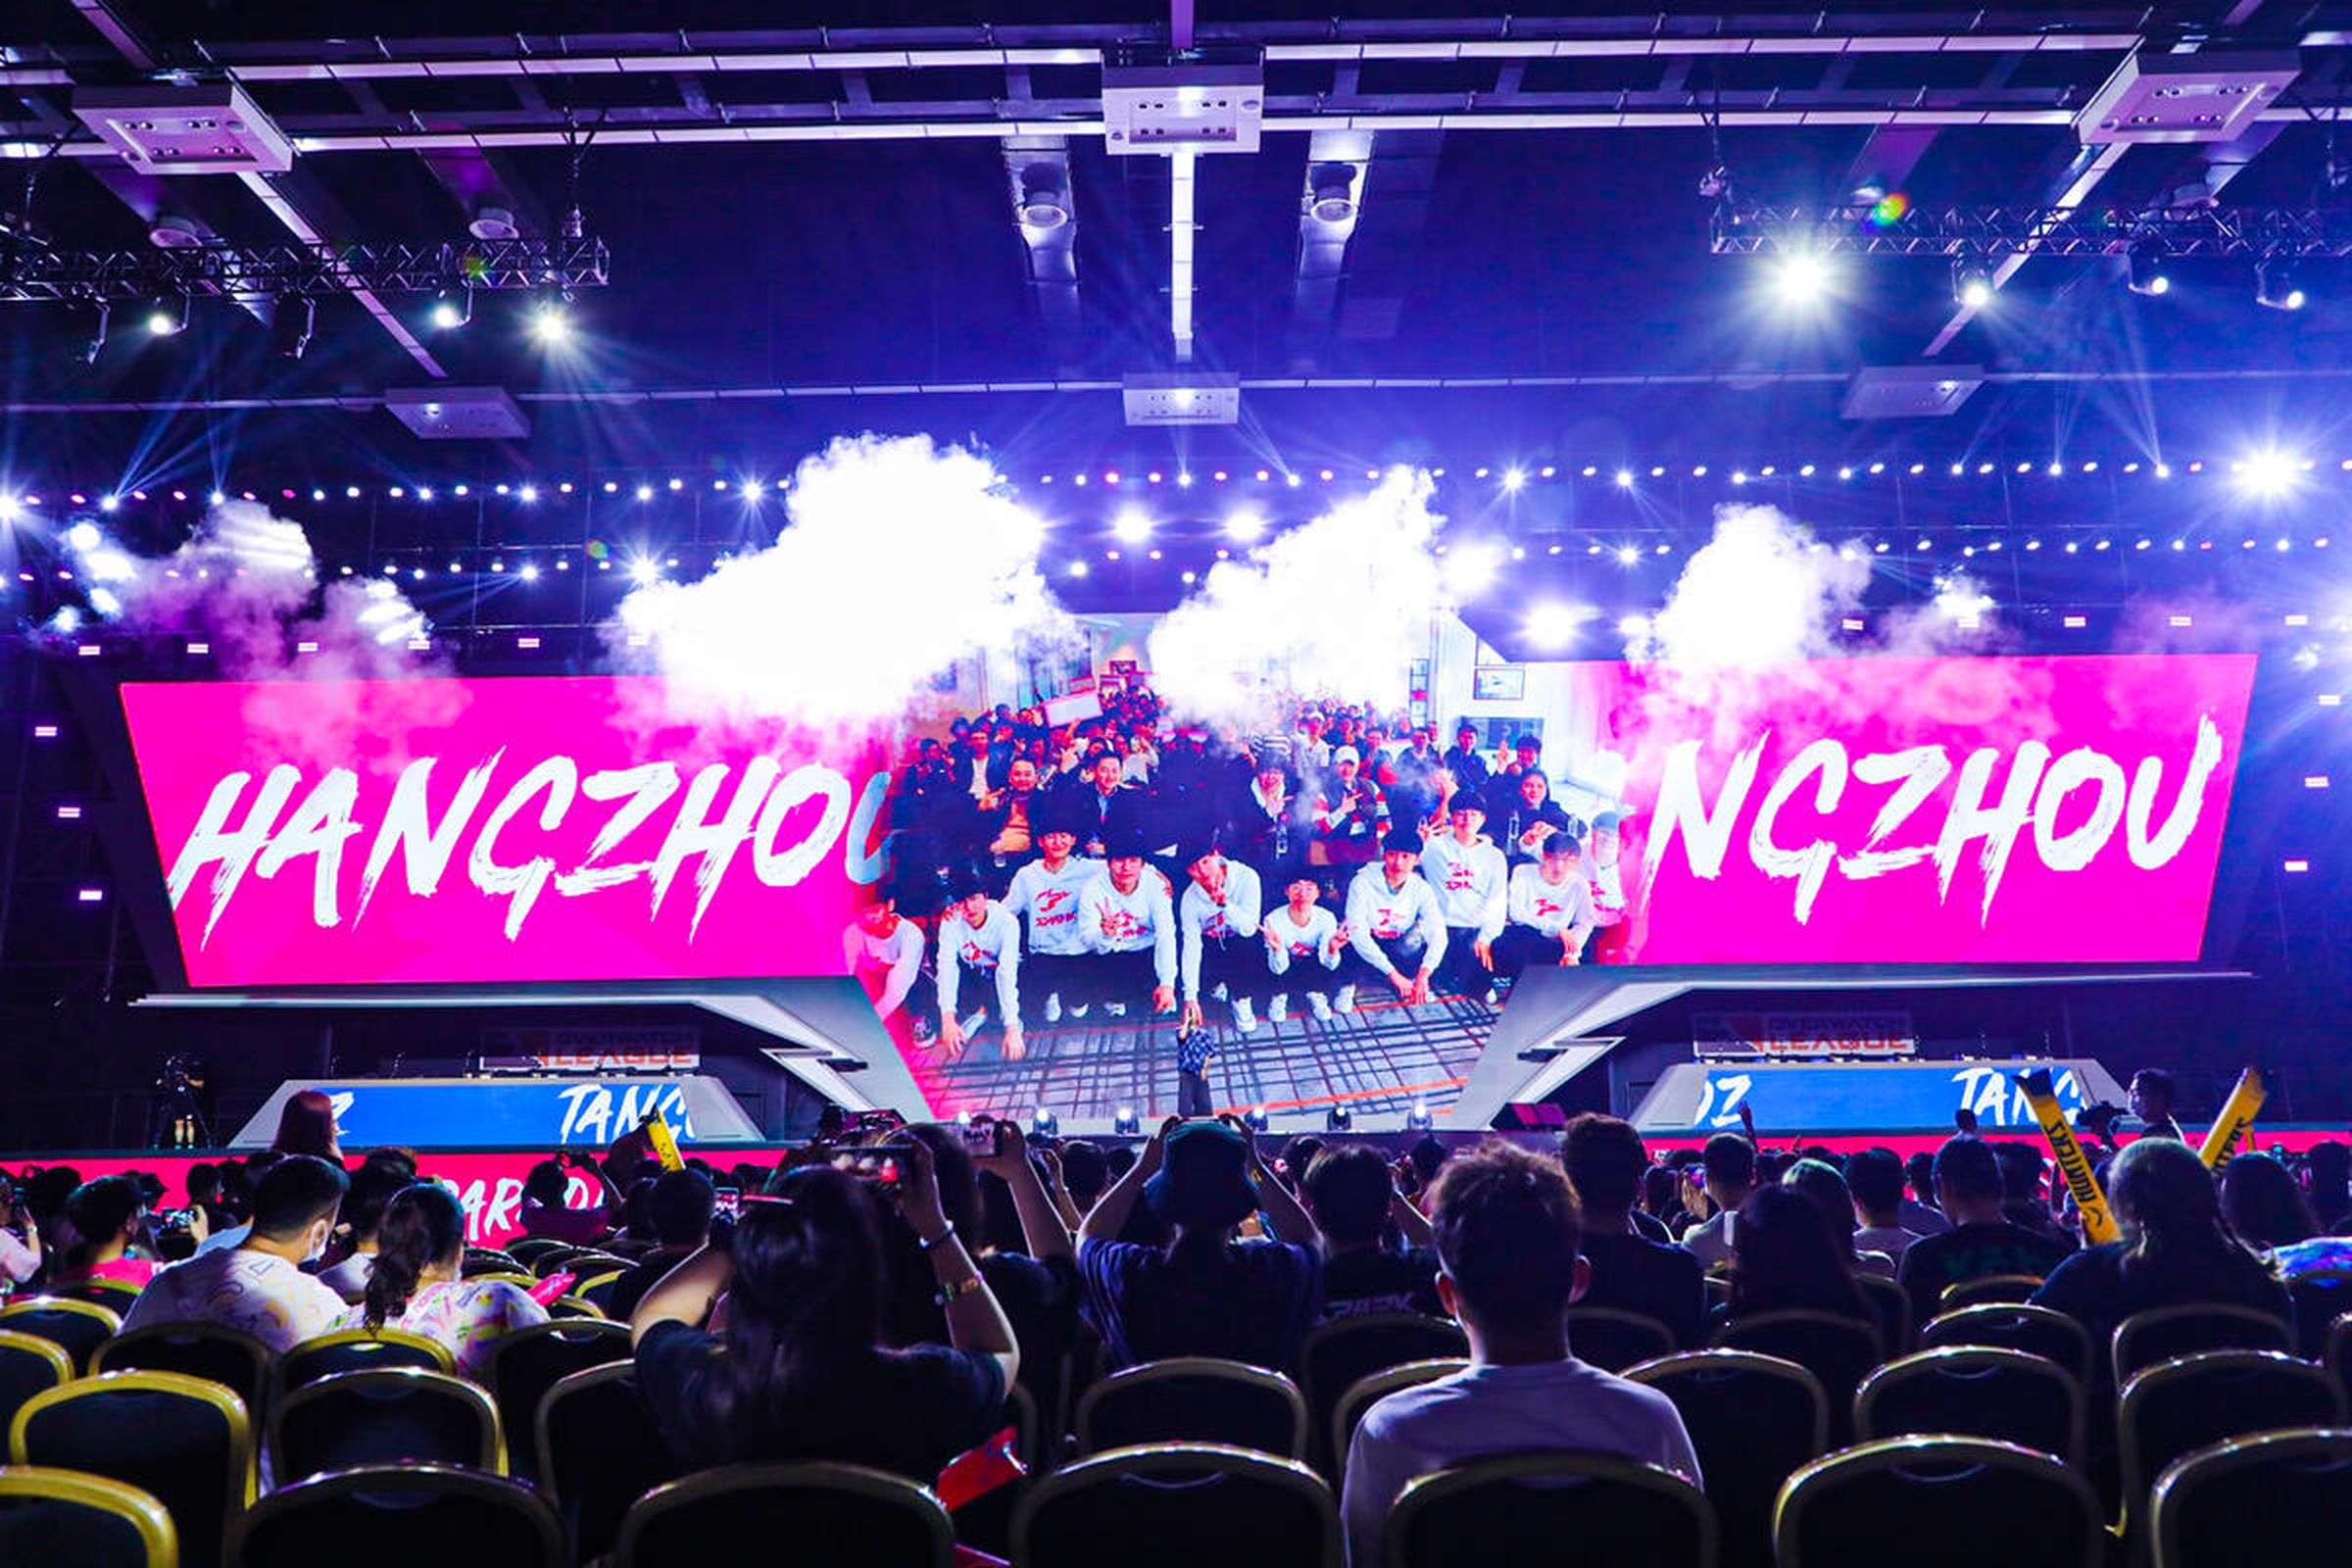 When COVID restrictions relaxed in parts of China in 2021, Chinese Overwatch teams were able to hold their own live events.